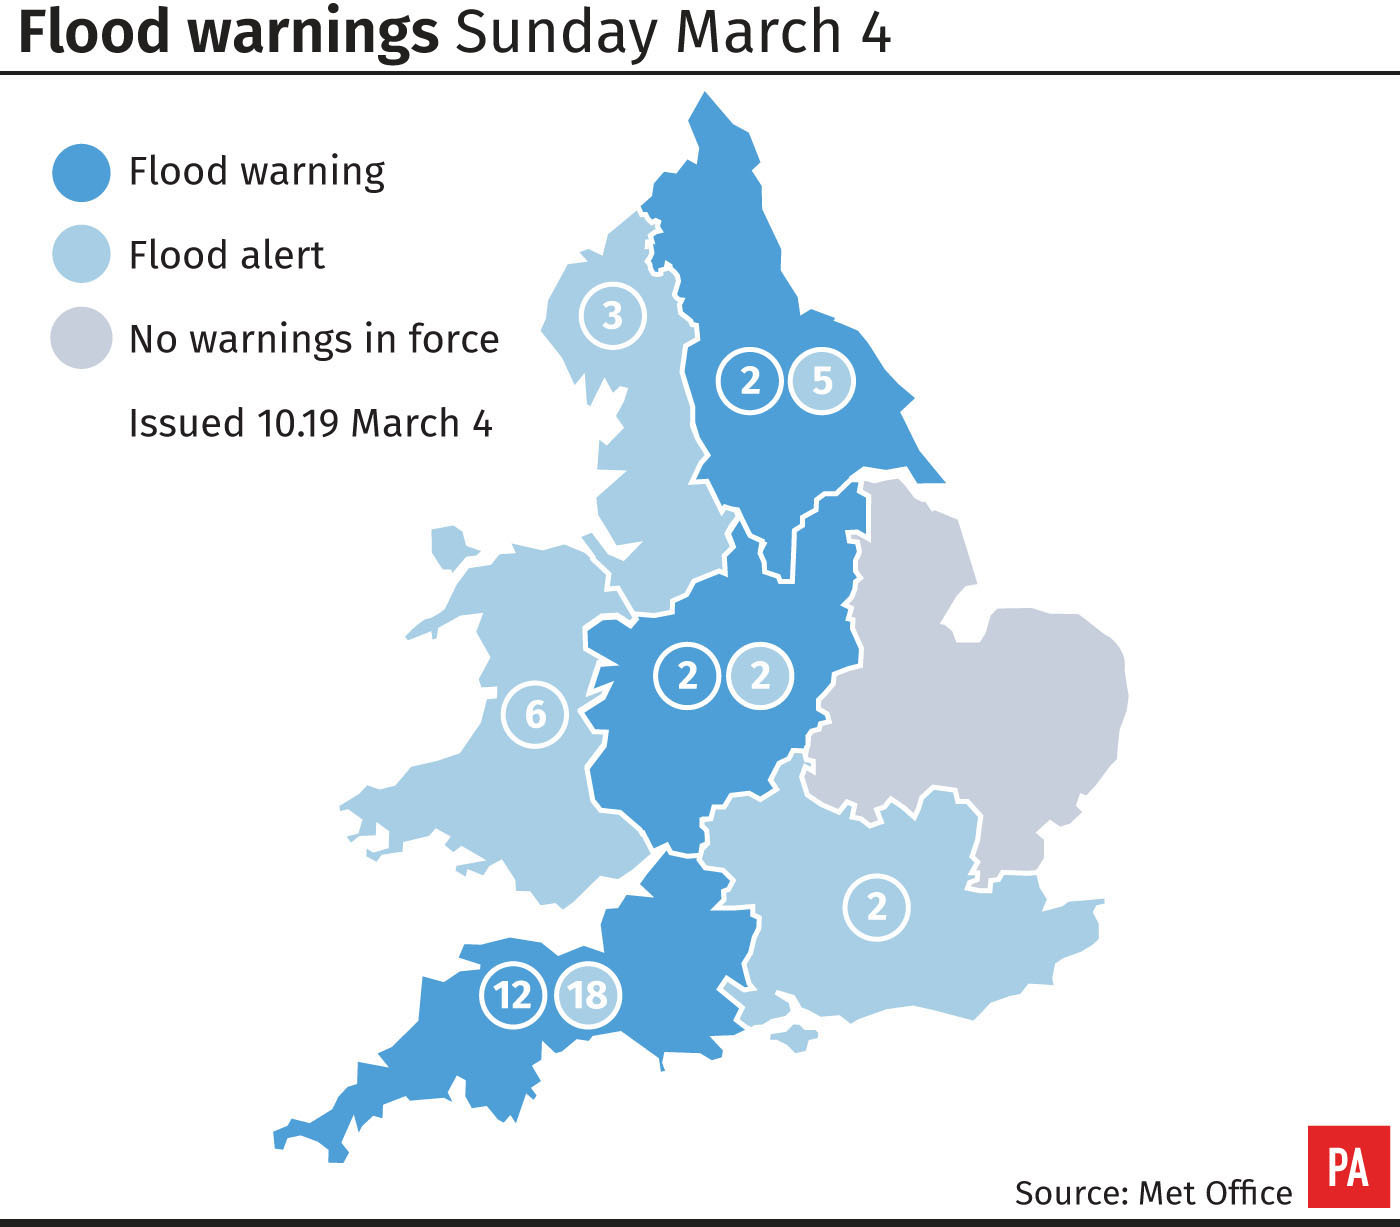 Flood warnings issued for England and Wales by the Met Office